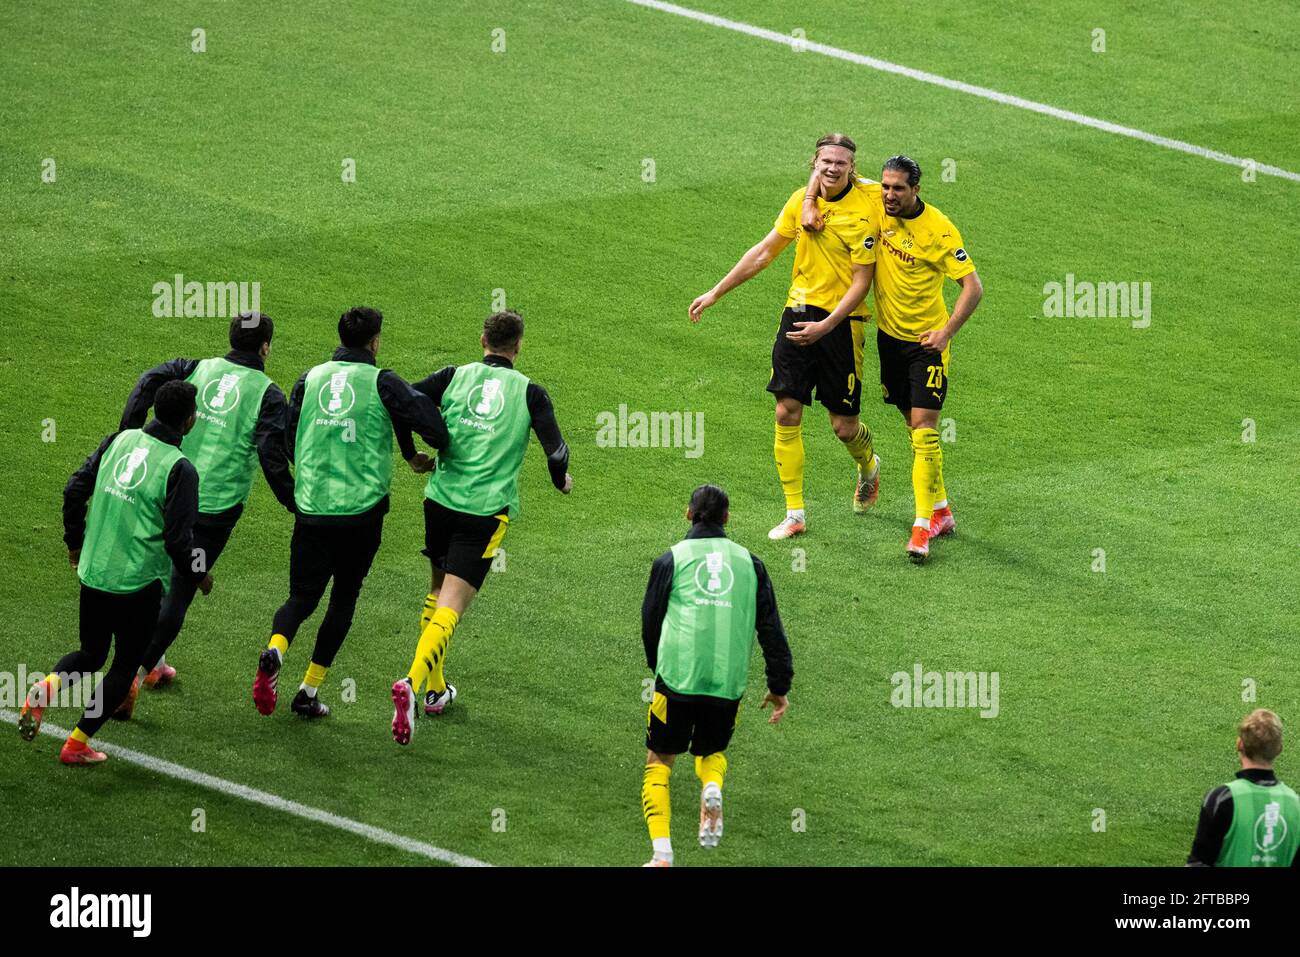 Berlin, Olympiastadion 13.05.21: Erling Haaland (BVB) (L) celebrates scoring the 4:1 goal with Emre Can (BVB) and teammates during the final cup match Stock Photo